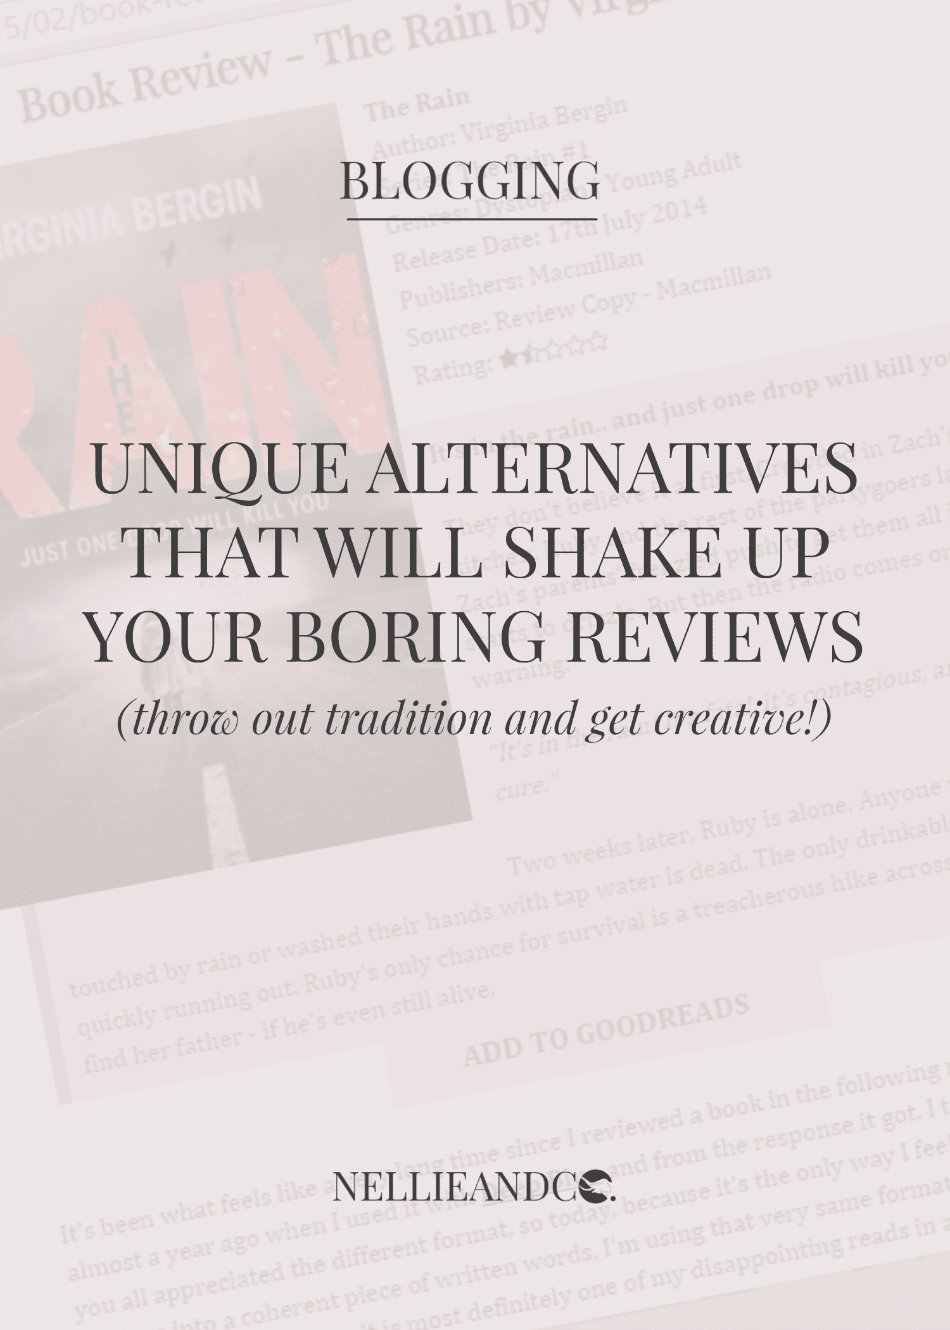 Say goodbye to those boring, same old style reviews and use any of these awesome unique alternatives to bring your readers back!